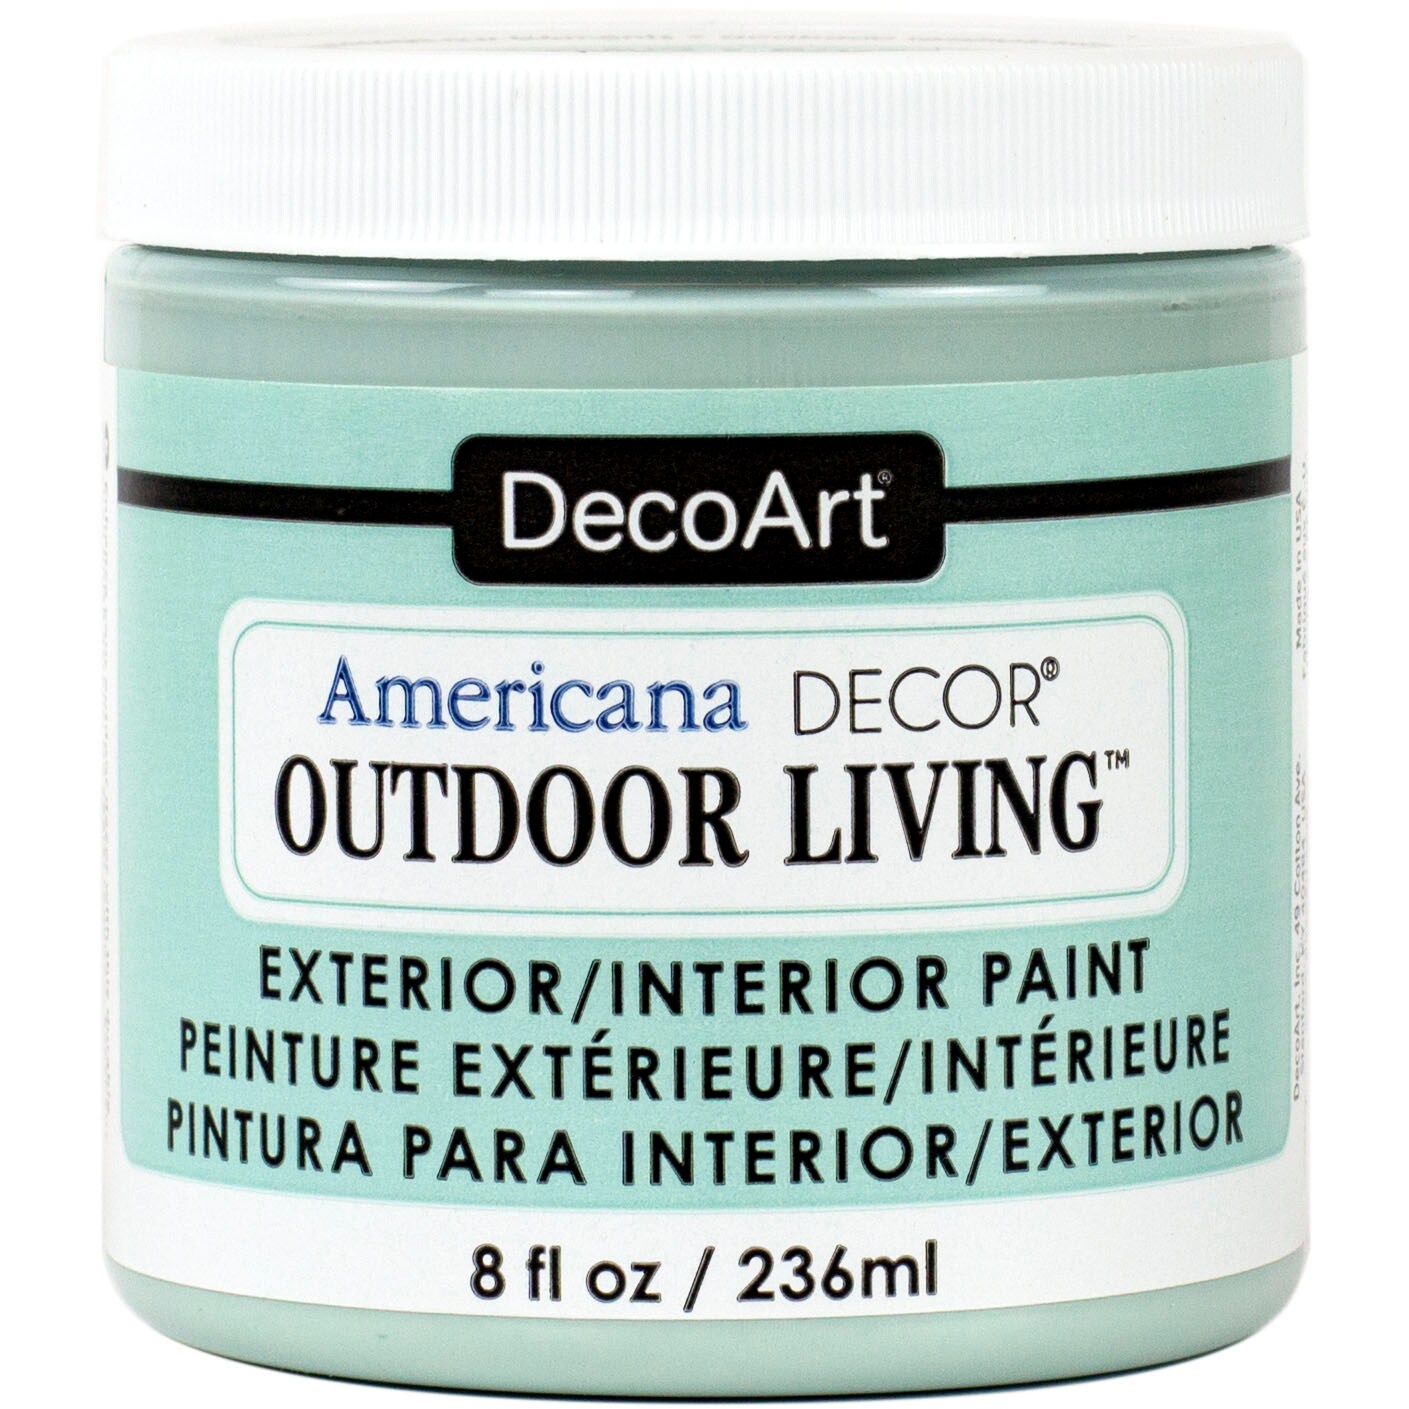 DecoArt Americana Decor Outdoor Living Paint, 8oz., Frosted Glass